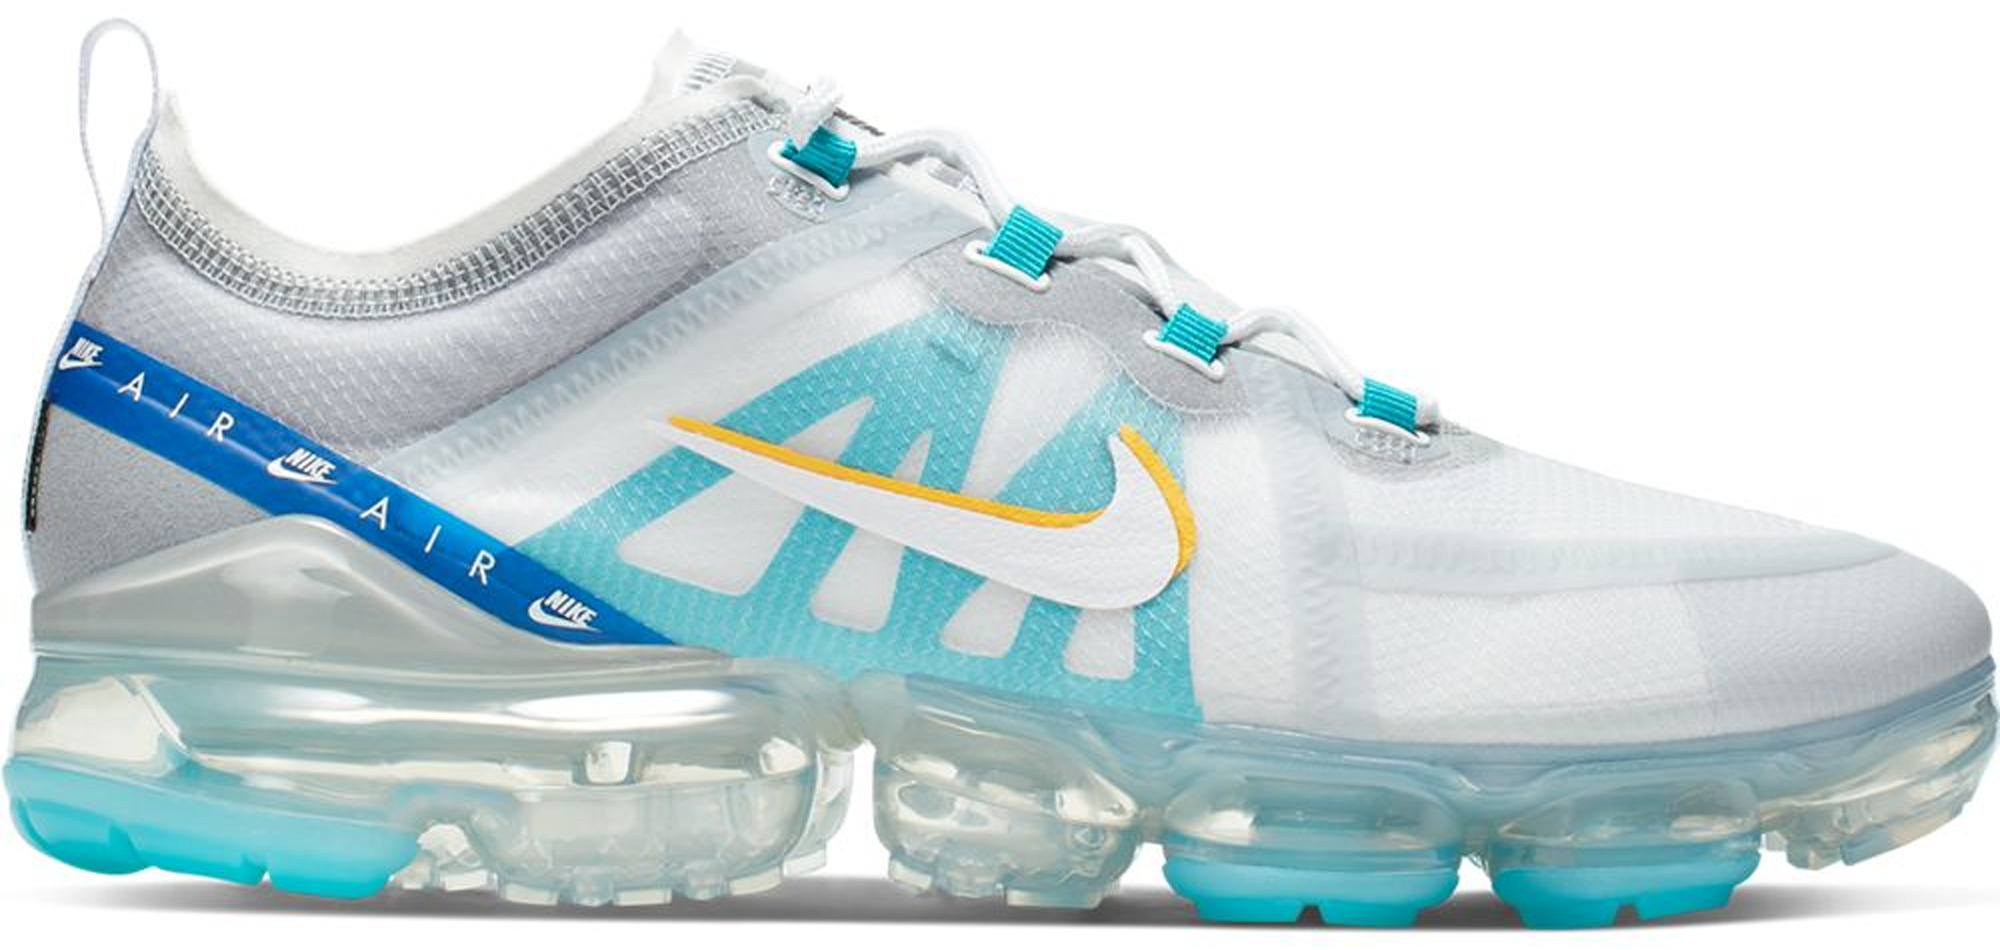 white and gold vapormax 2019